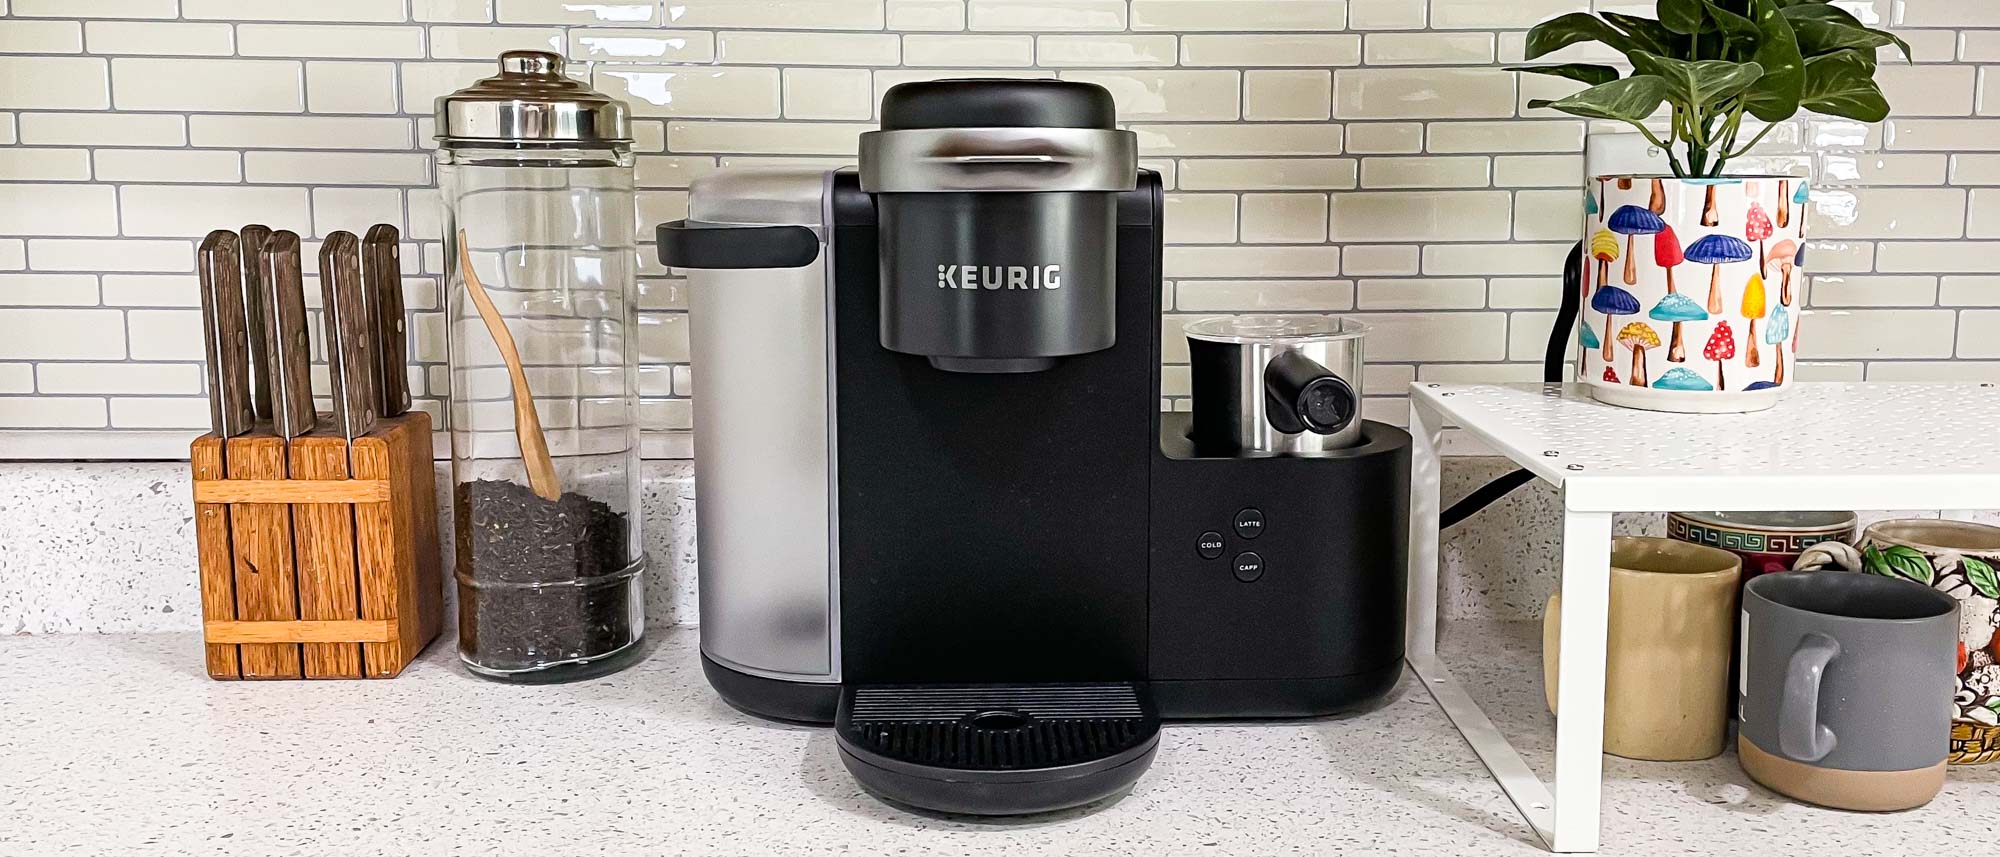 Keurig K-Latte Single Serve K-Cup Coffee and Latte Maker, Comes with Milk Frother, Compatible With all Keurig K-Cup Pods, Black